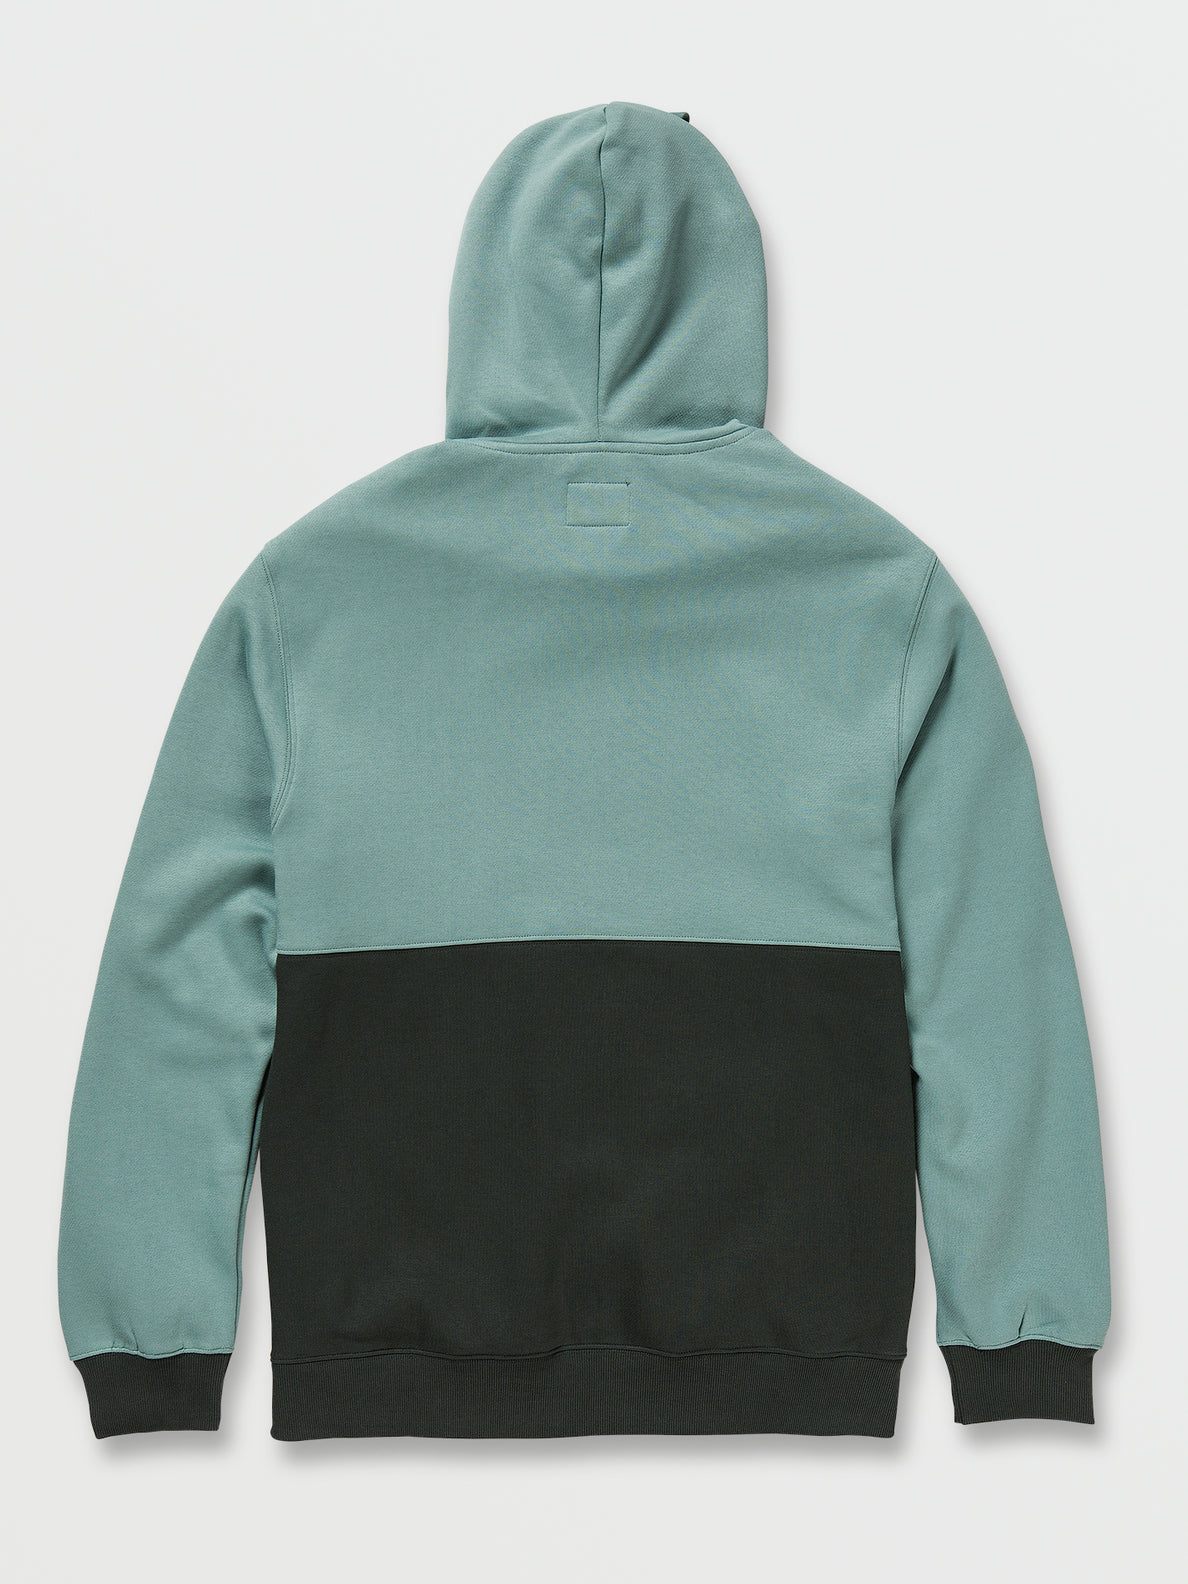 Divided Pullover Hoodie - Fern (A4132205_FRN) [B]